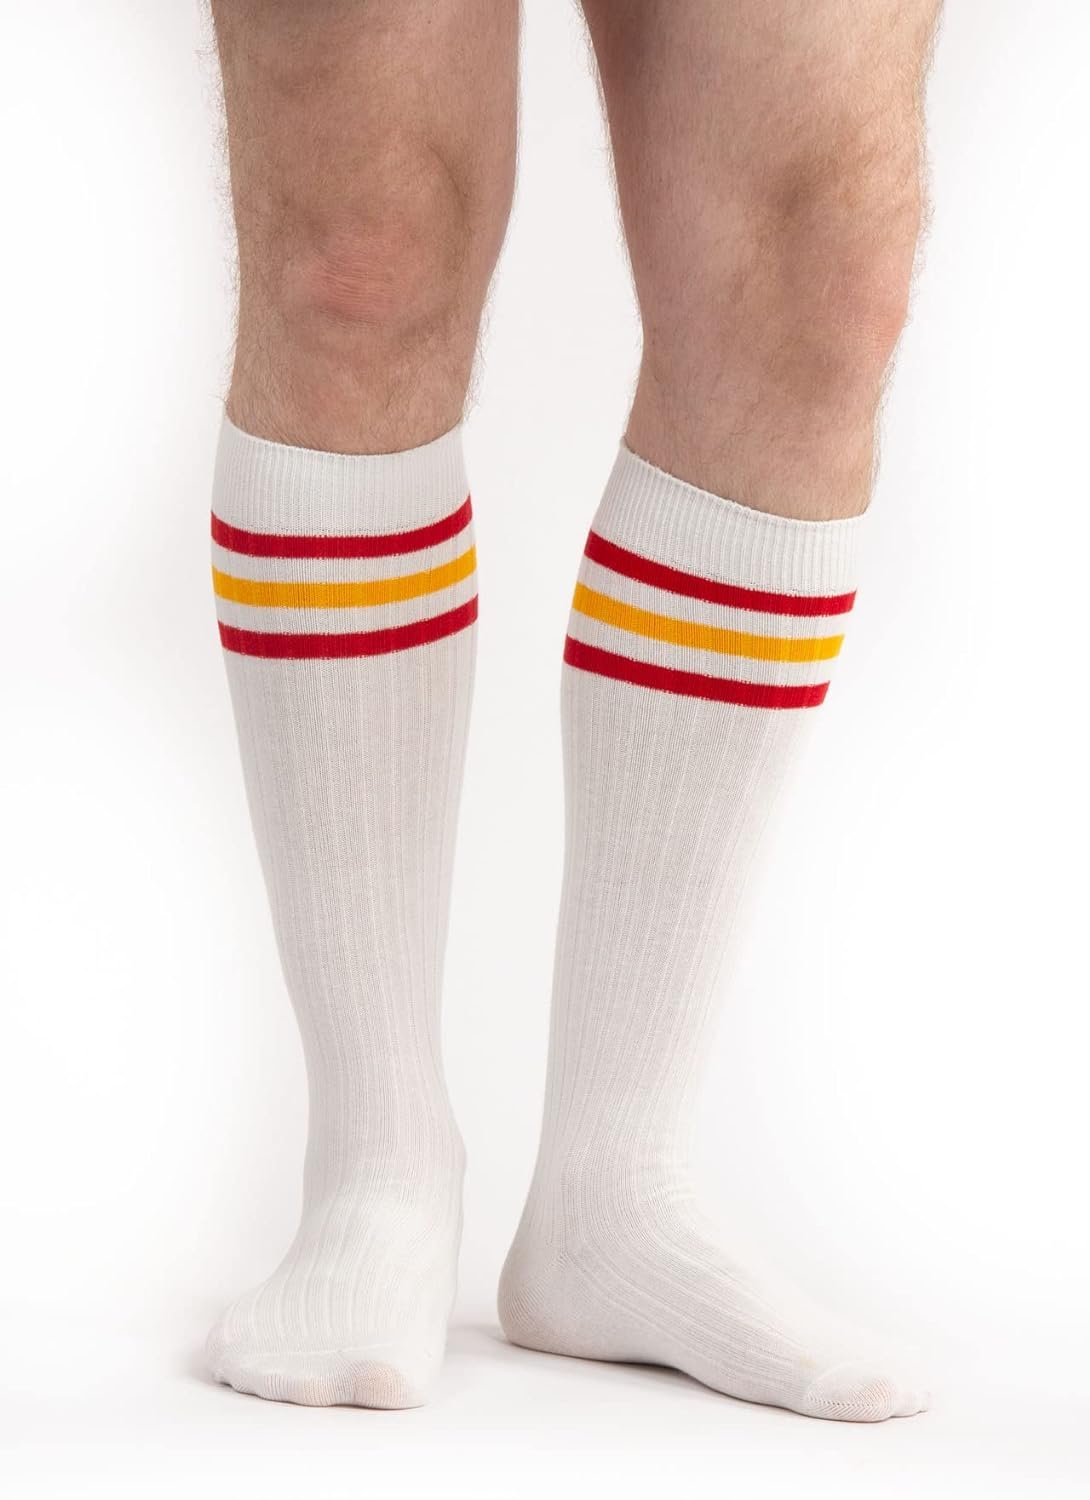 Mens Knee High Cotton Striped Socks review